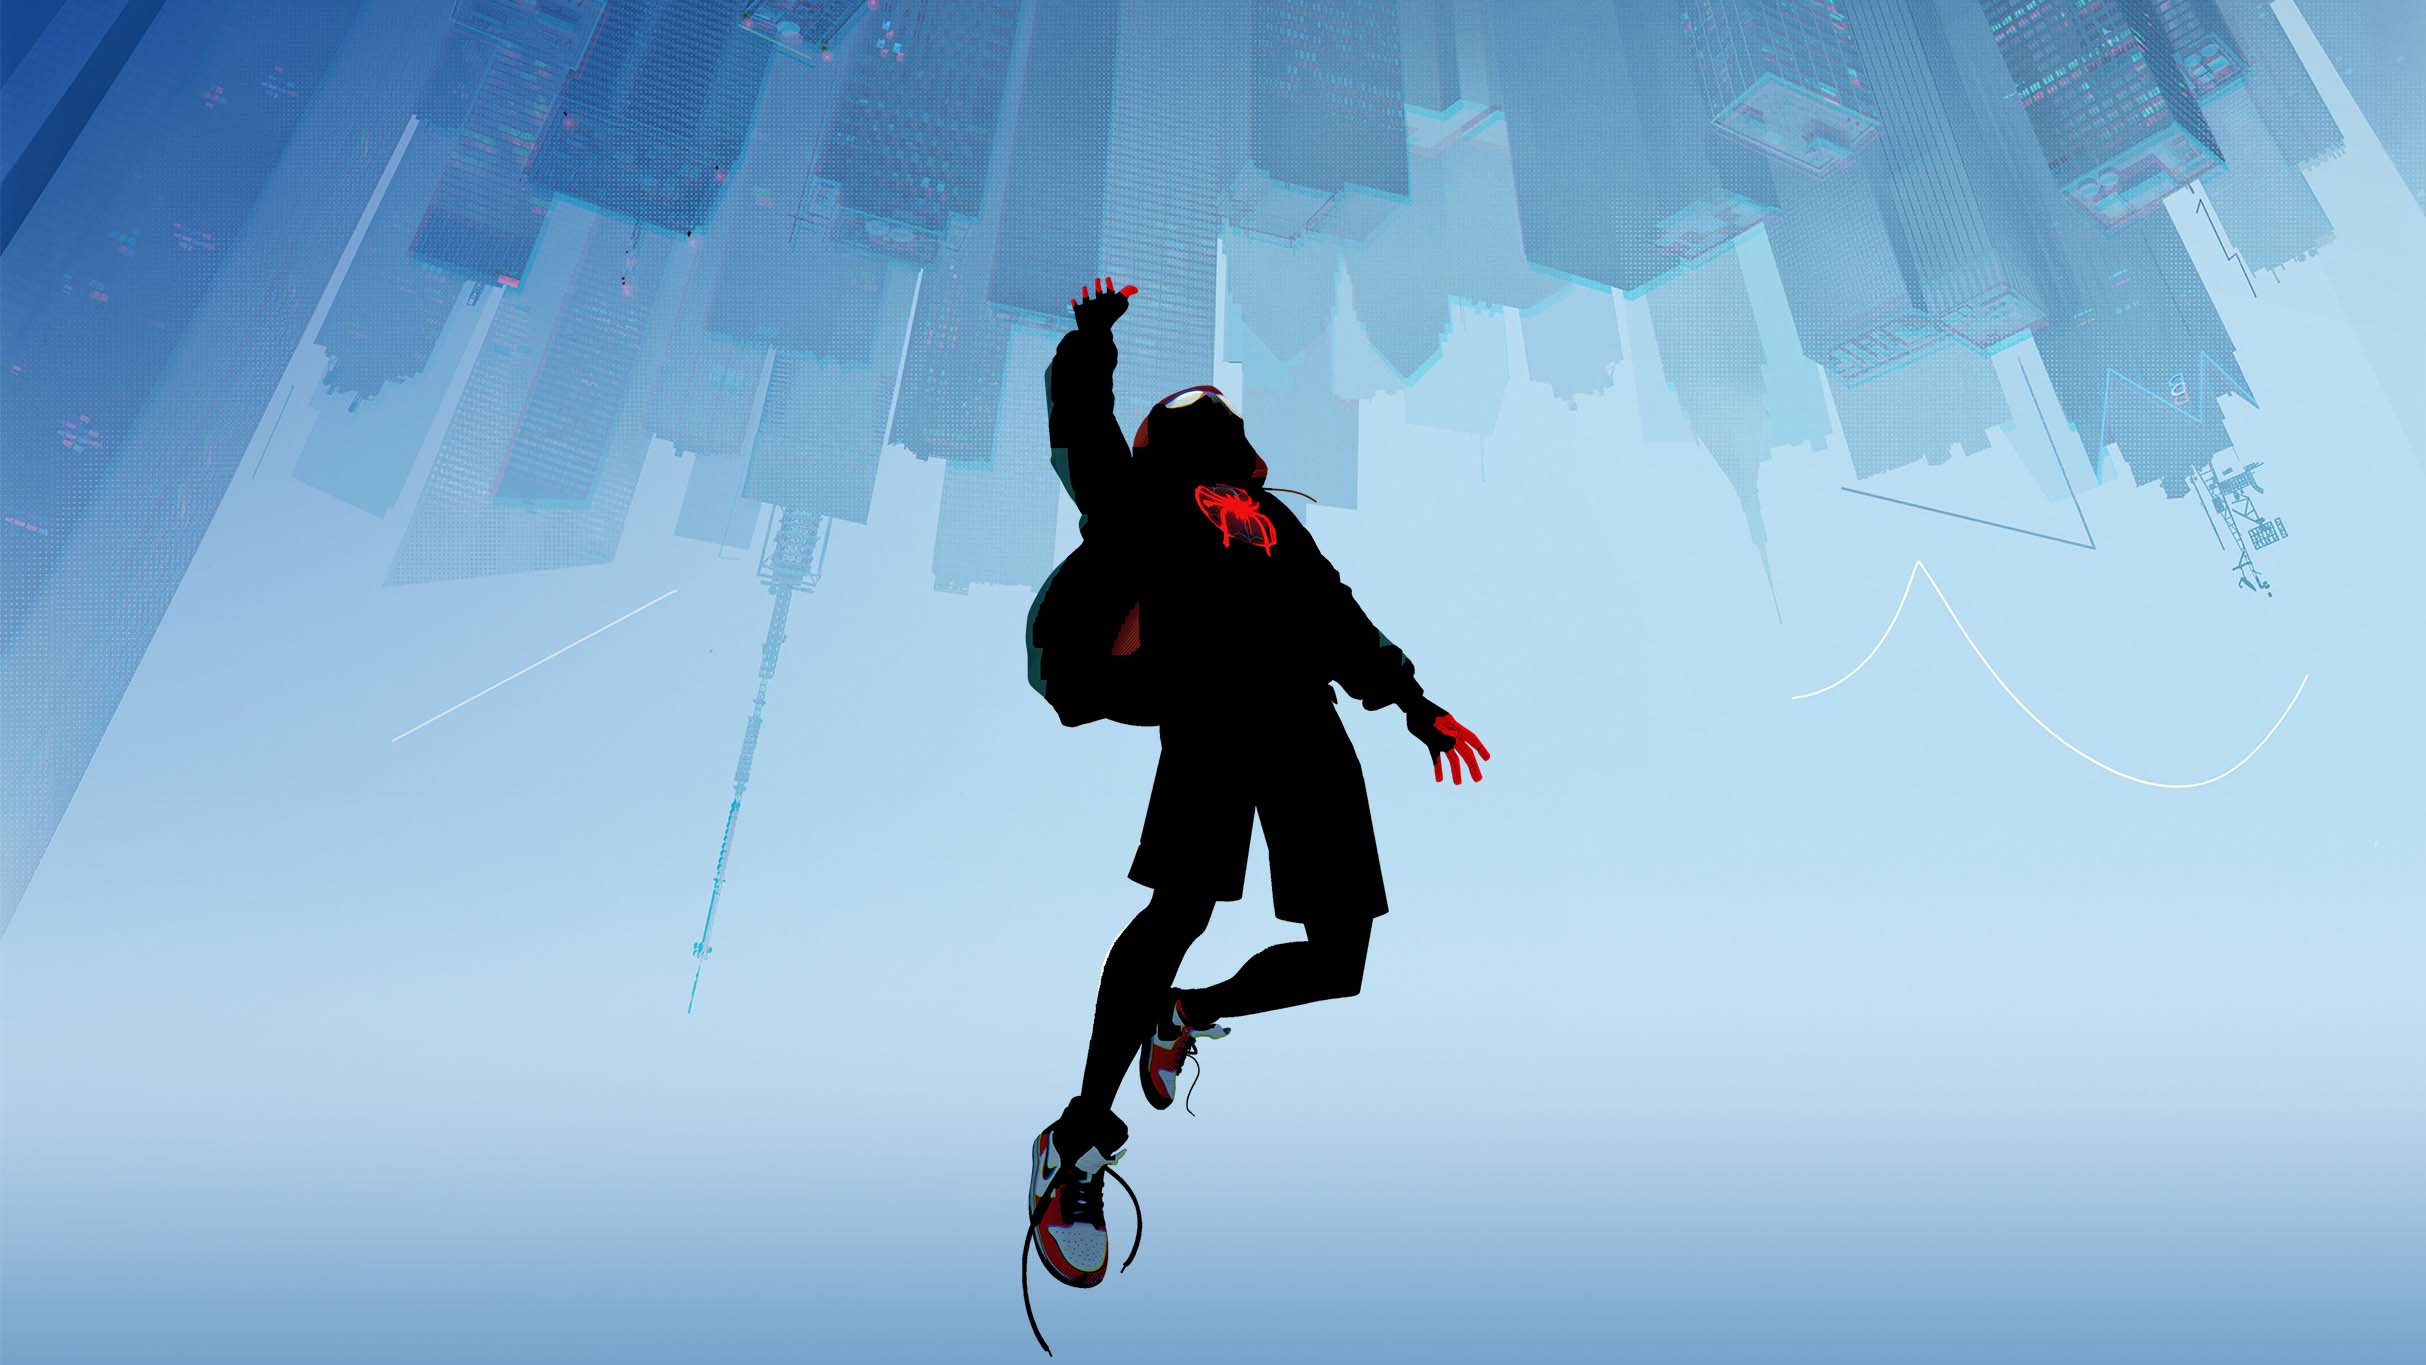 Spider-Man: Into the Spider-Verse Live in Concert (Touring) in South Wharf promo photo for Exclusive presale offer code